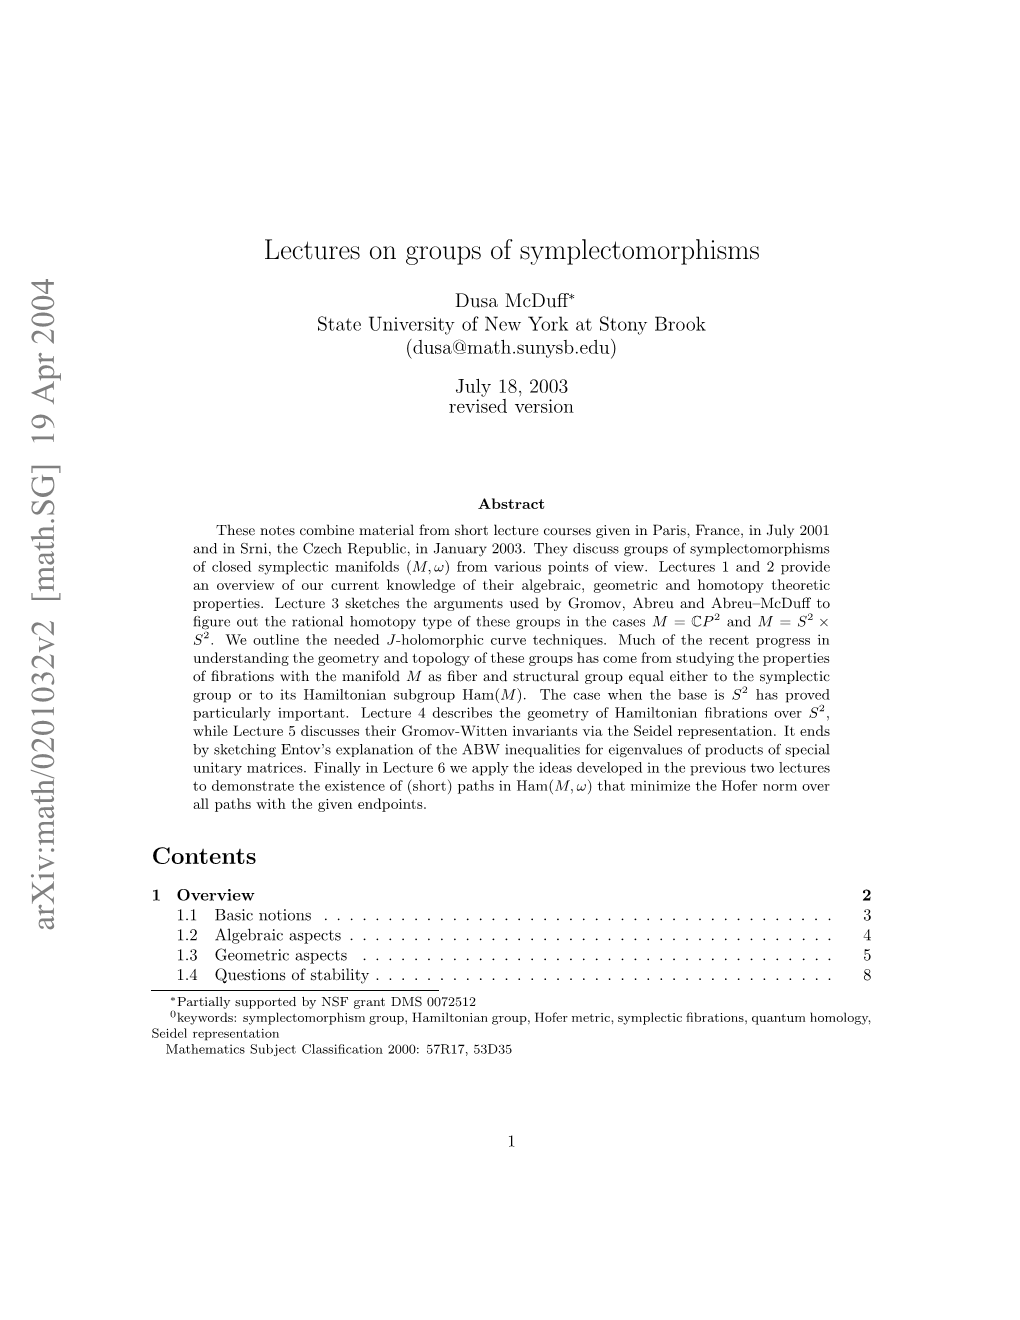 Lectures on Groups of Symplectomorphisms